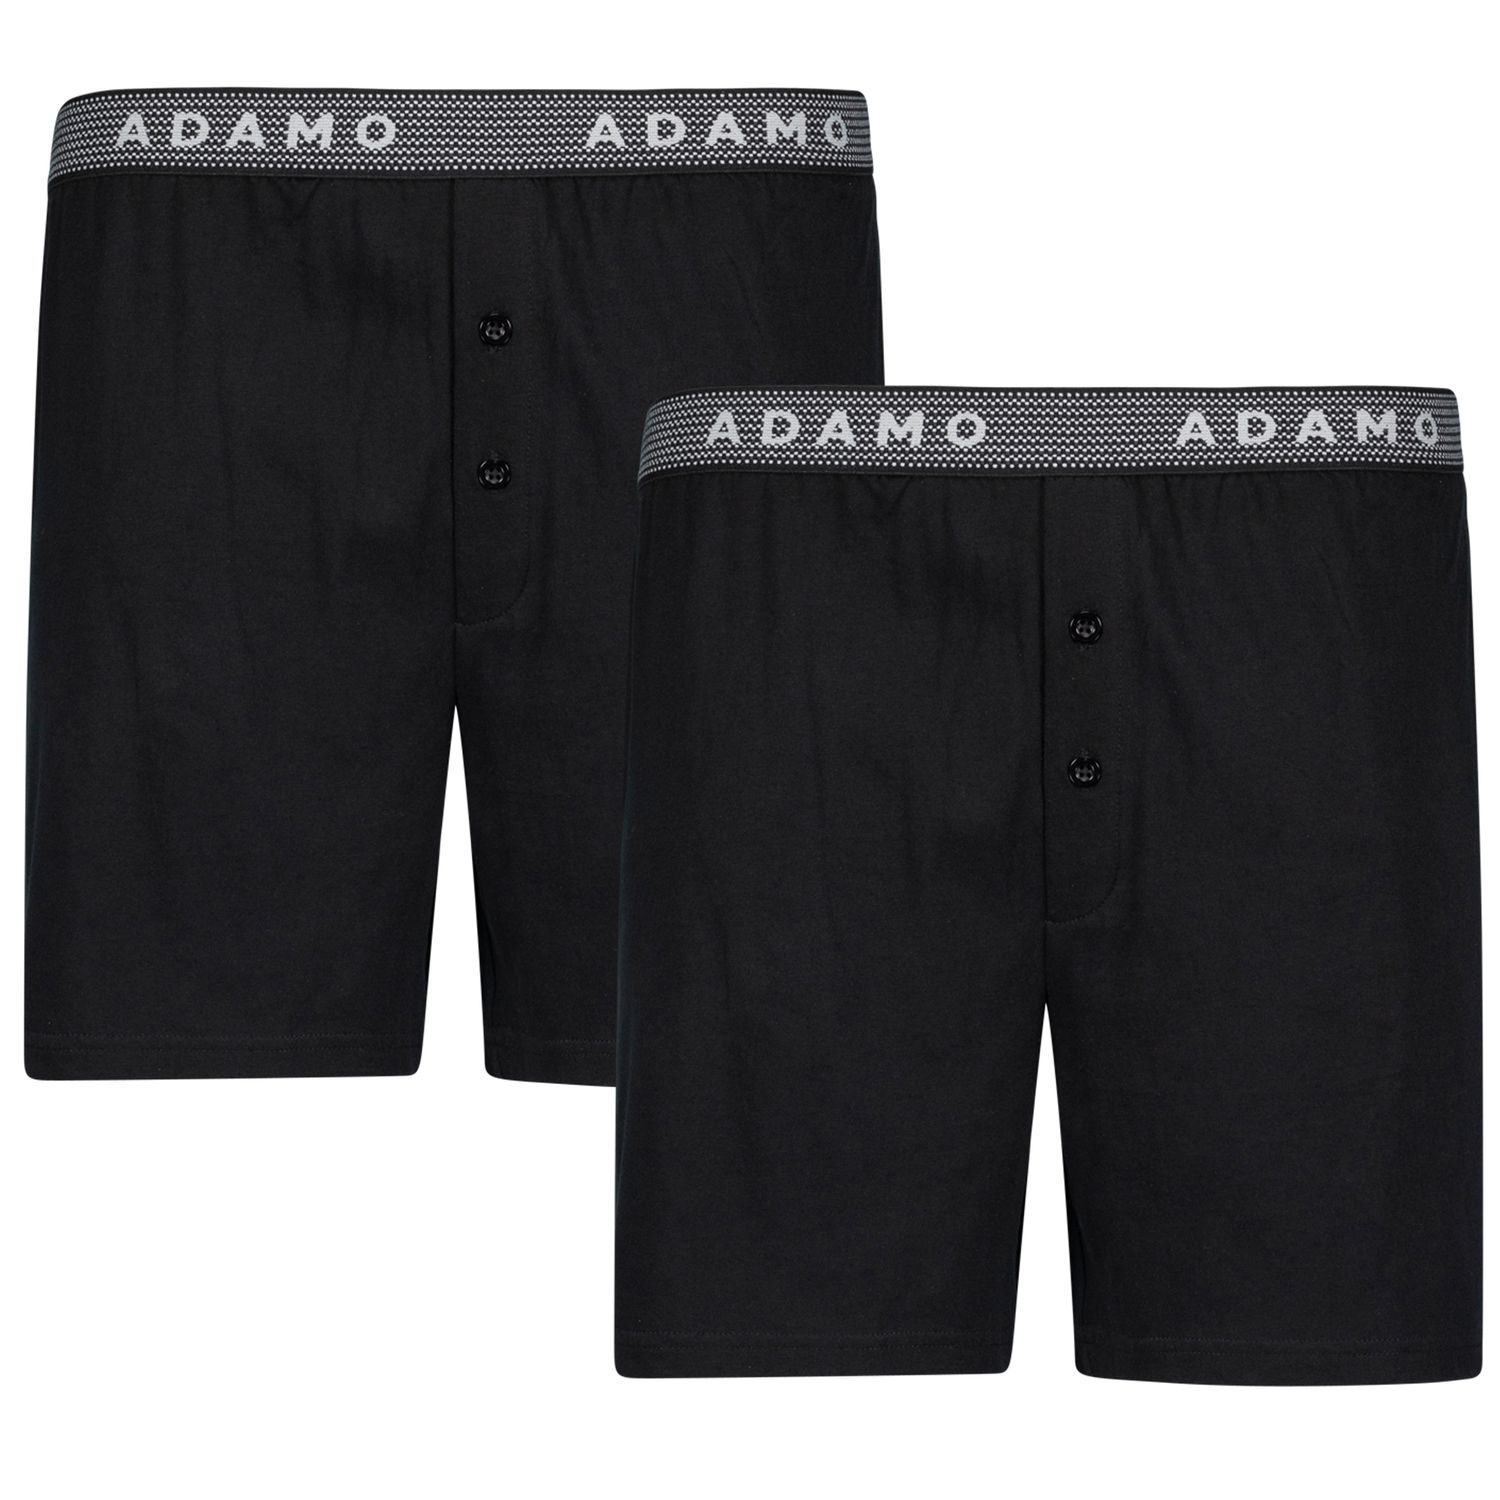 Black boxershorts by ADAMO series "Jonas" in oversizes up to 20 // double pack